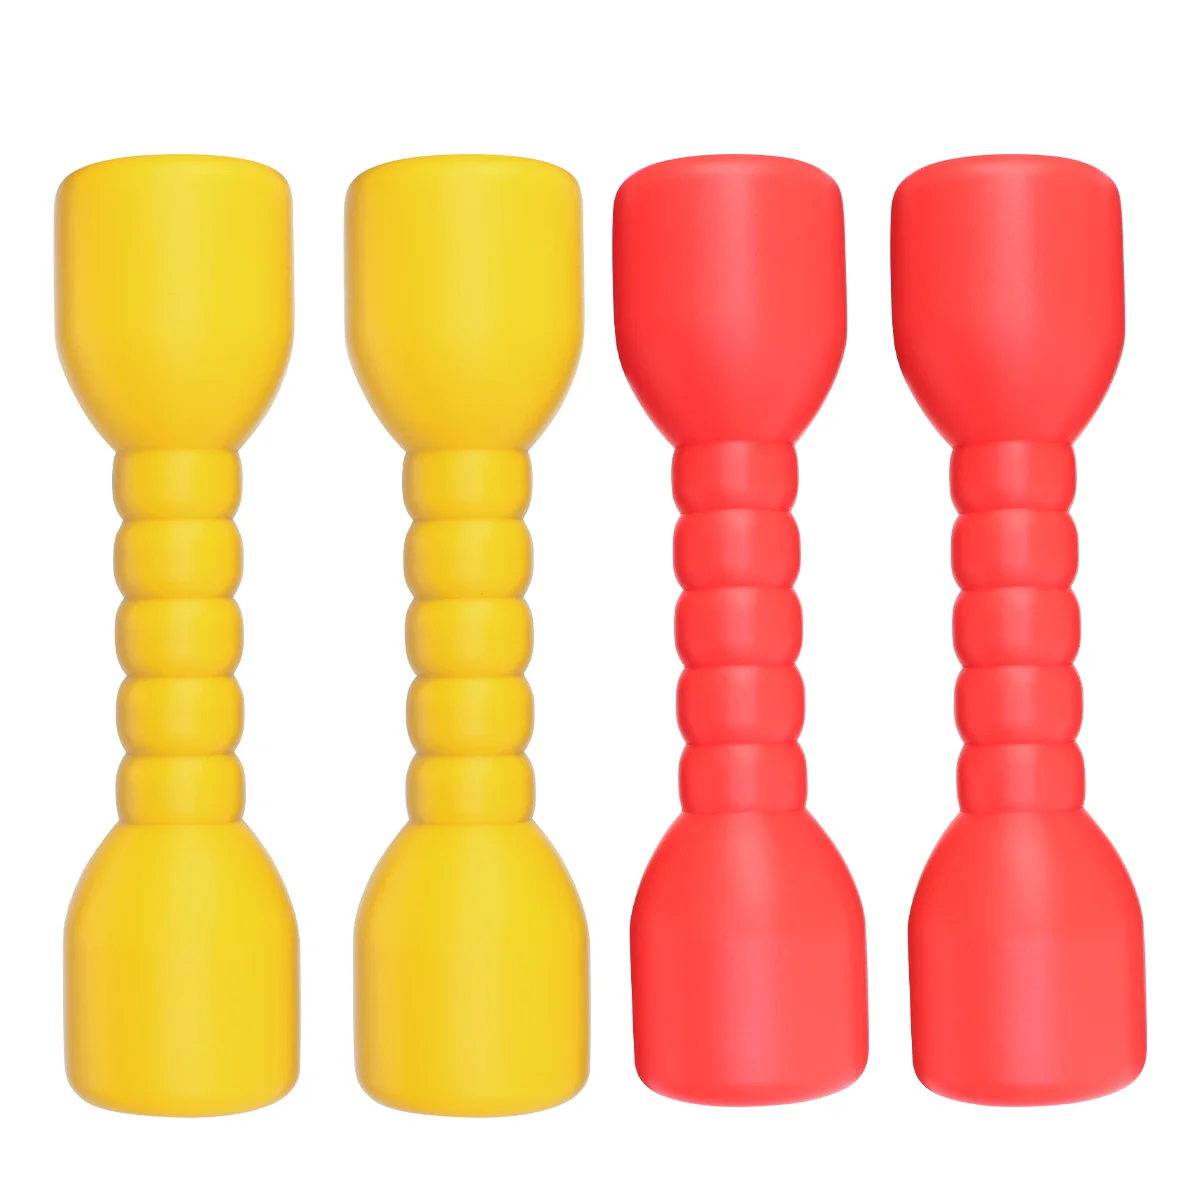 

2 Pairs of Household Children Dumbbell Gymnastics Props Fitness Dumbbell Exercise Toys for Kids (Red + Yellow)